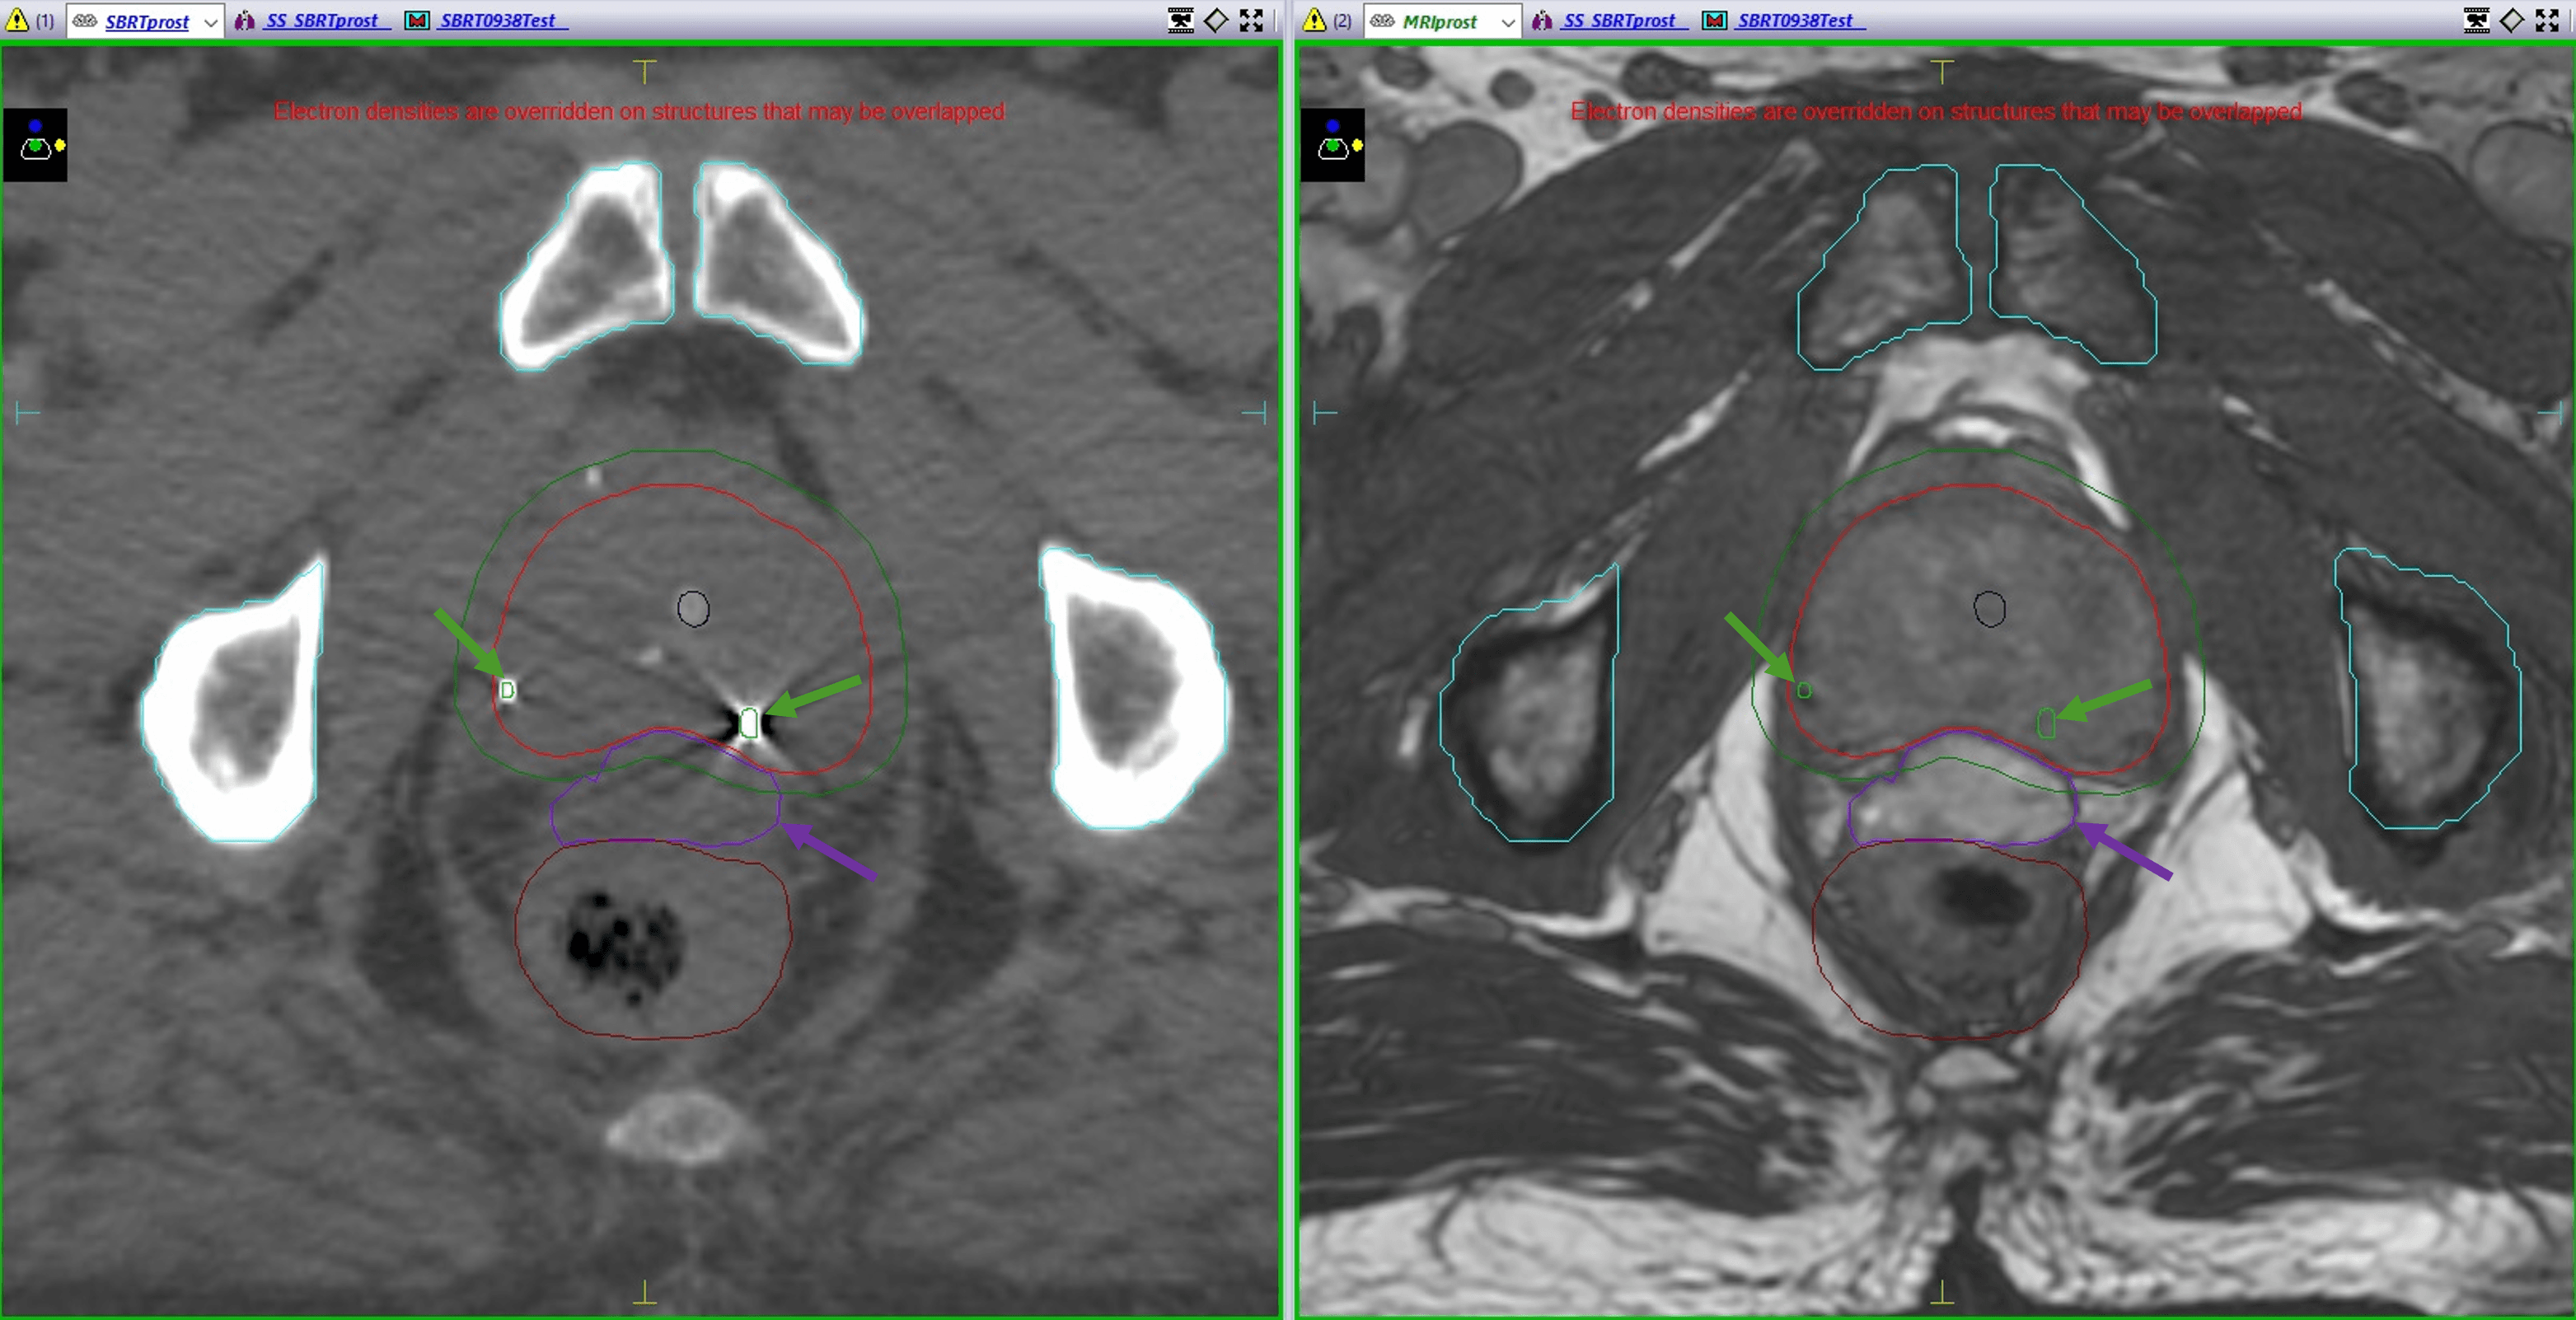 Figure 1. CT (left) and MRI (right) scans showing the positions of 2 gold fiducials (green arrows) and SpaceOAR (purple arrow).